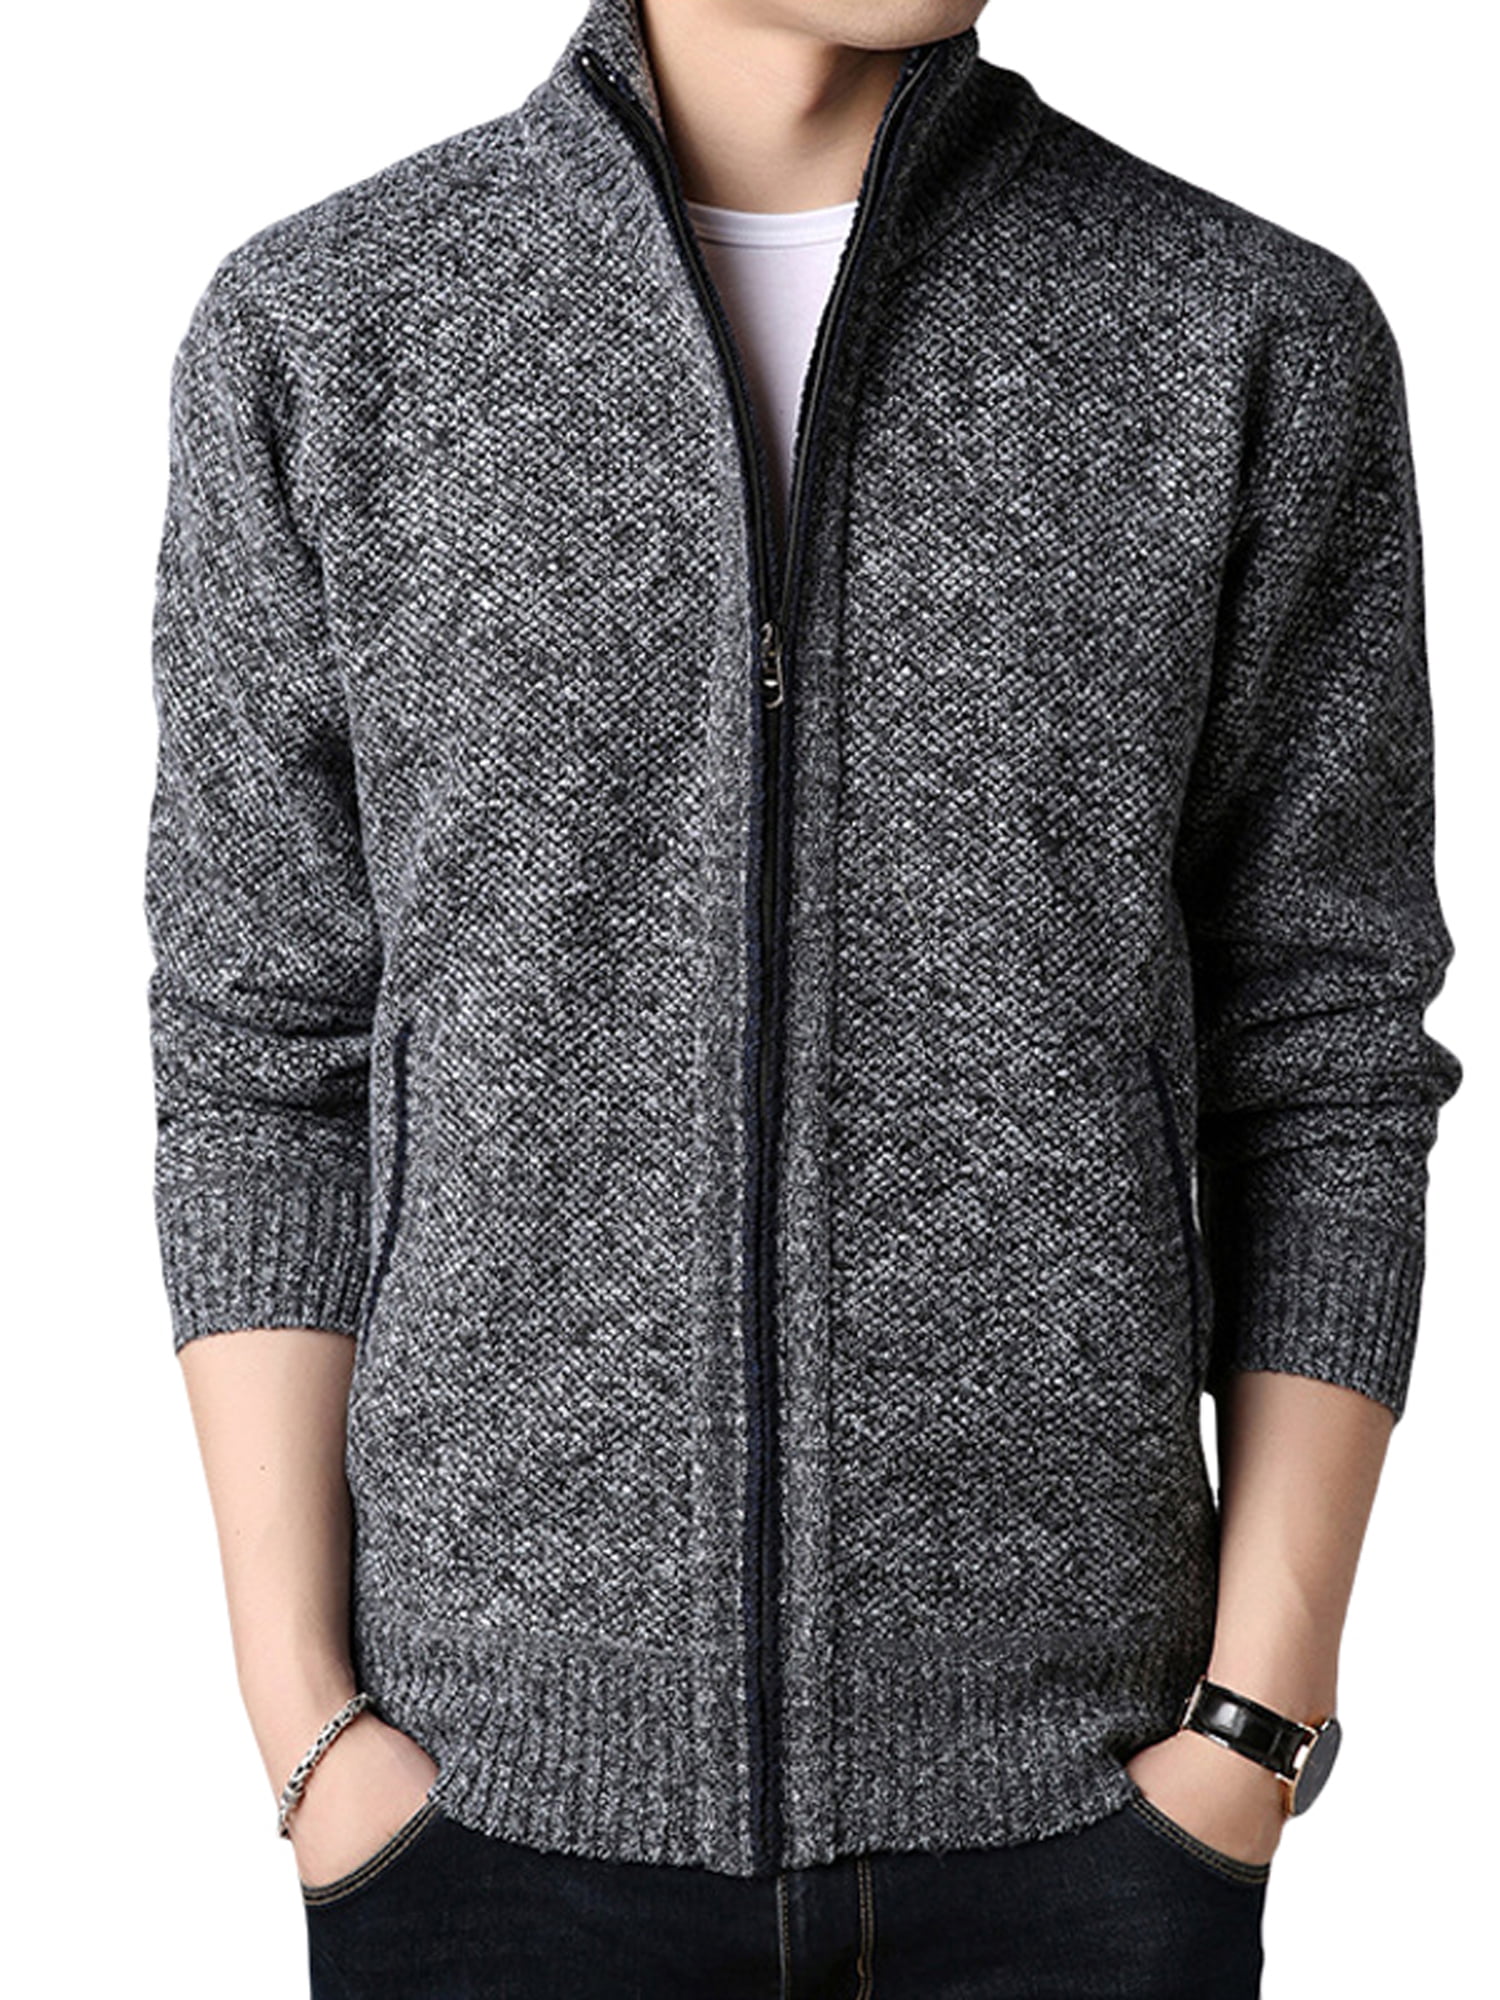 HANMAX Men's Casual Zip-up Long Sleeve Stand Collar Knitted Cardigan Plush Sweater 